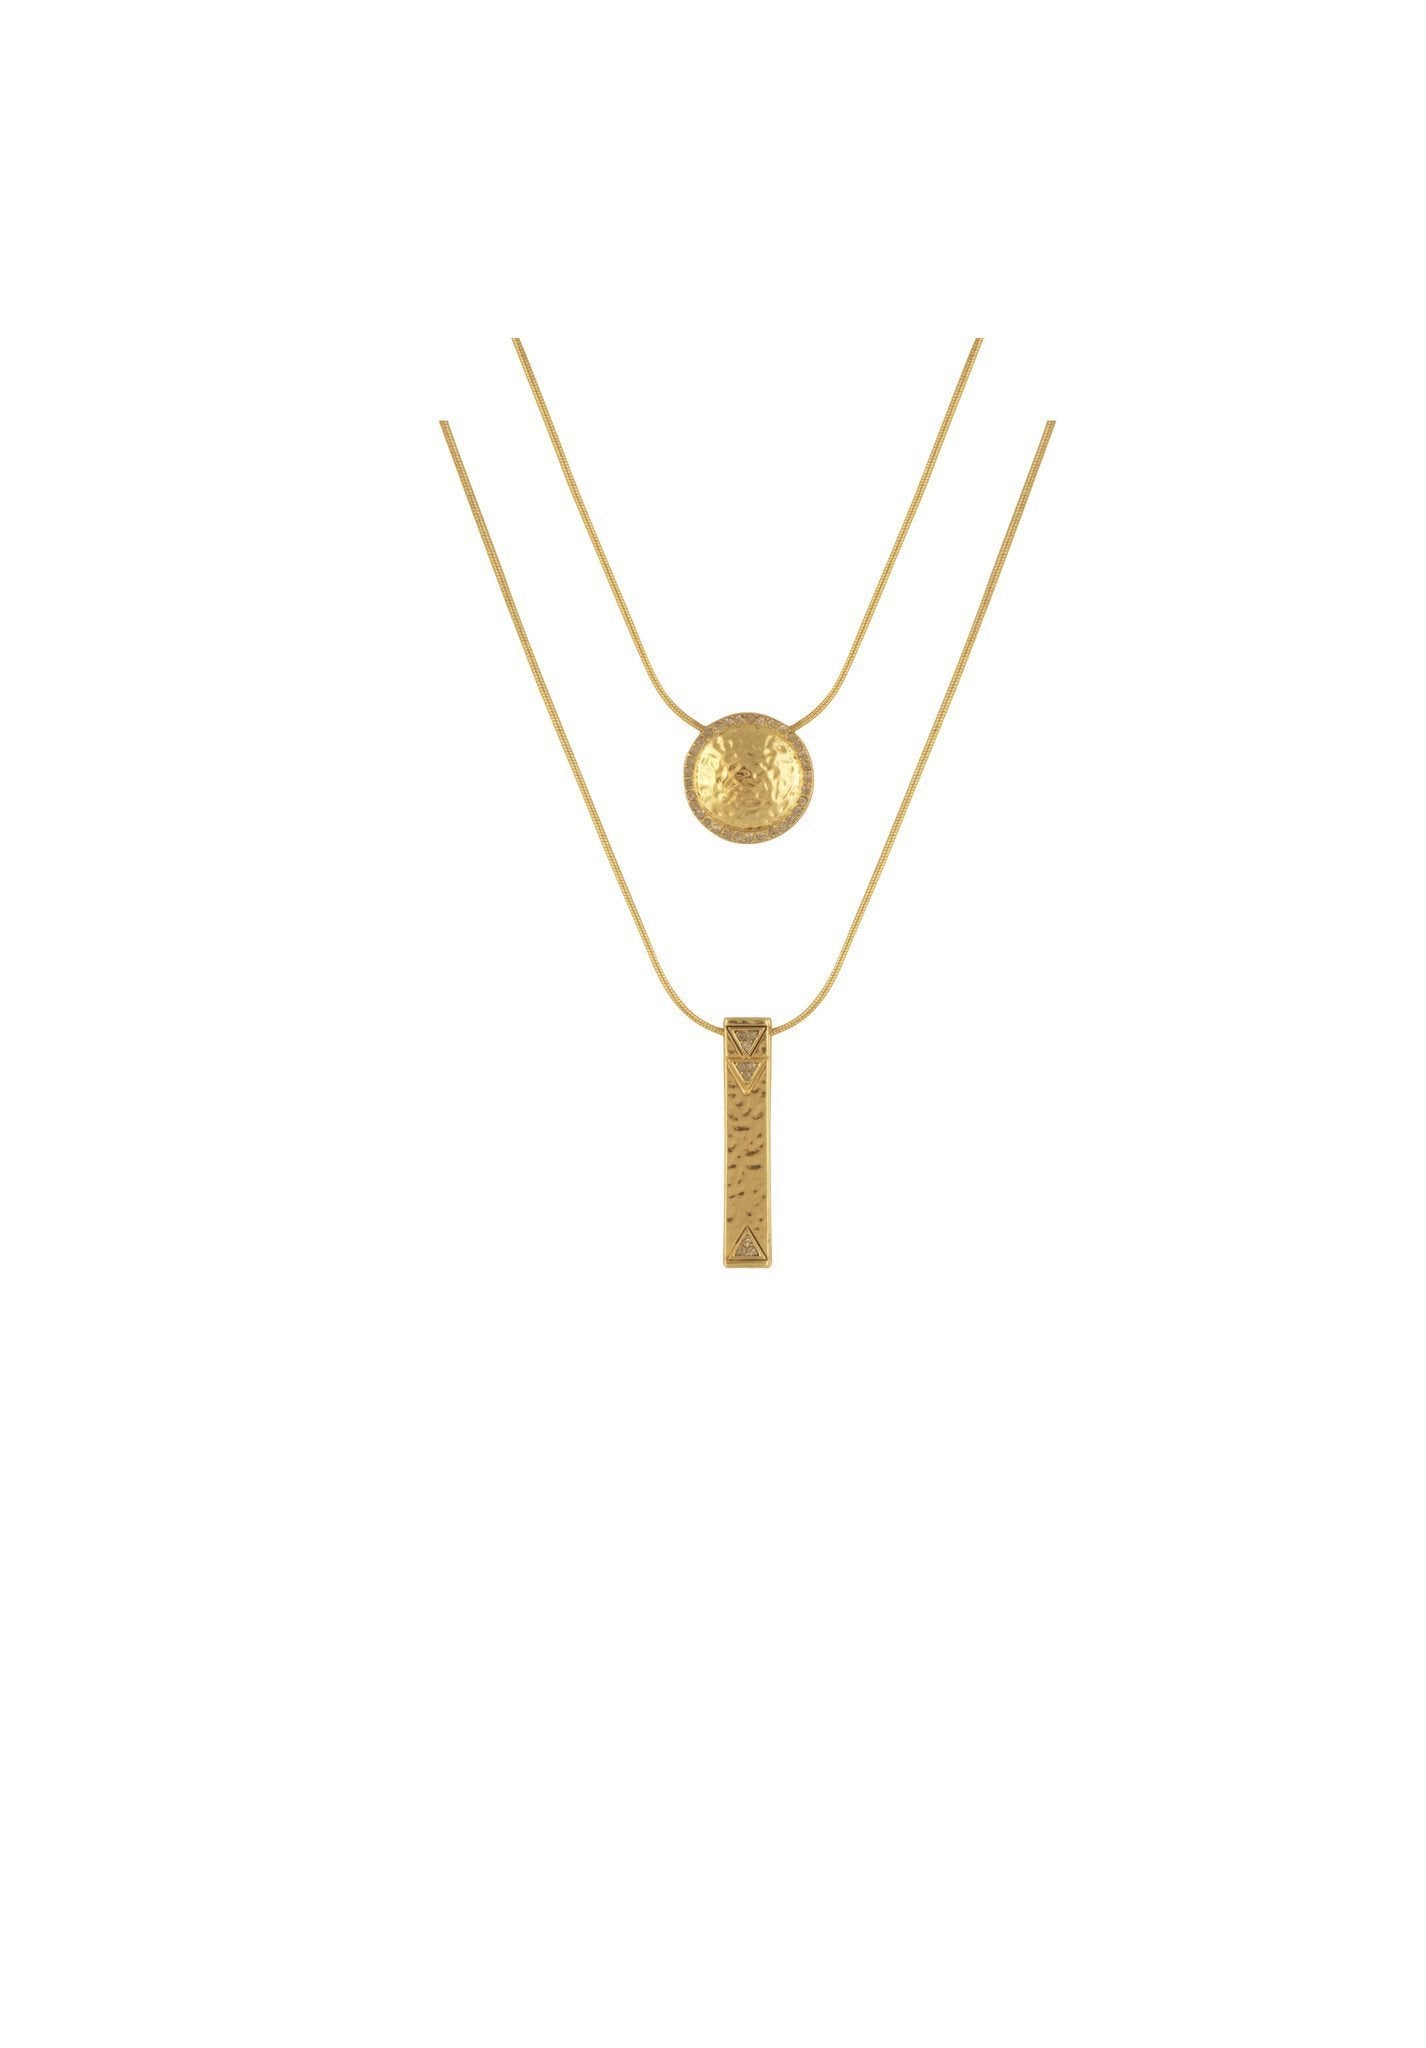 Women outfit in a necklace rental from House of Harlow 1960 called Gold Scutum Double Pendant Necklace